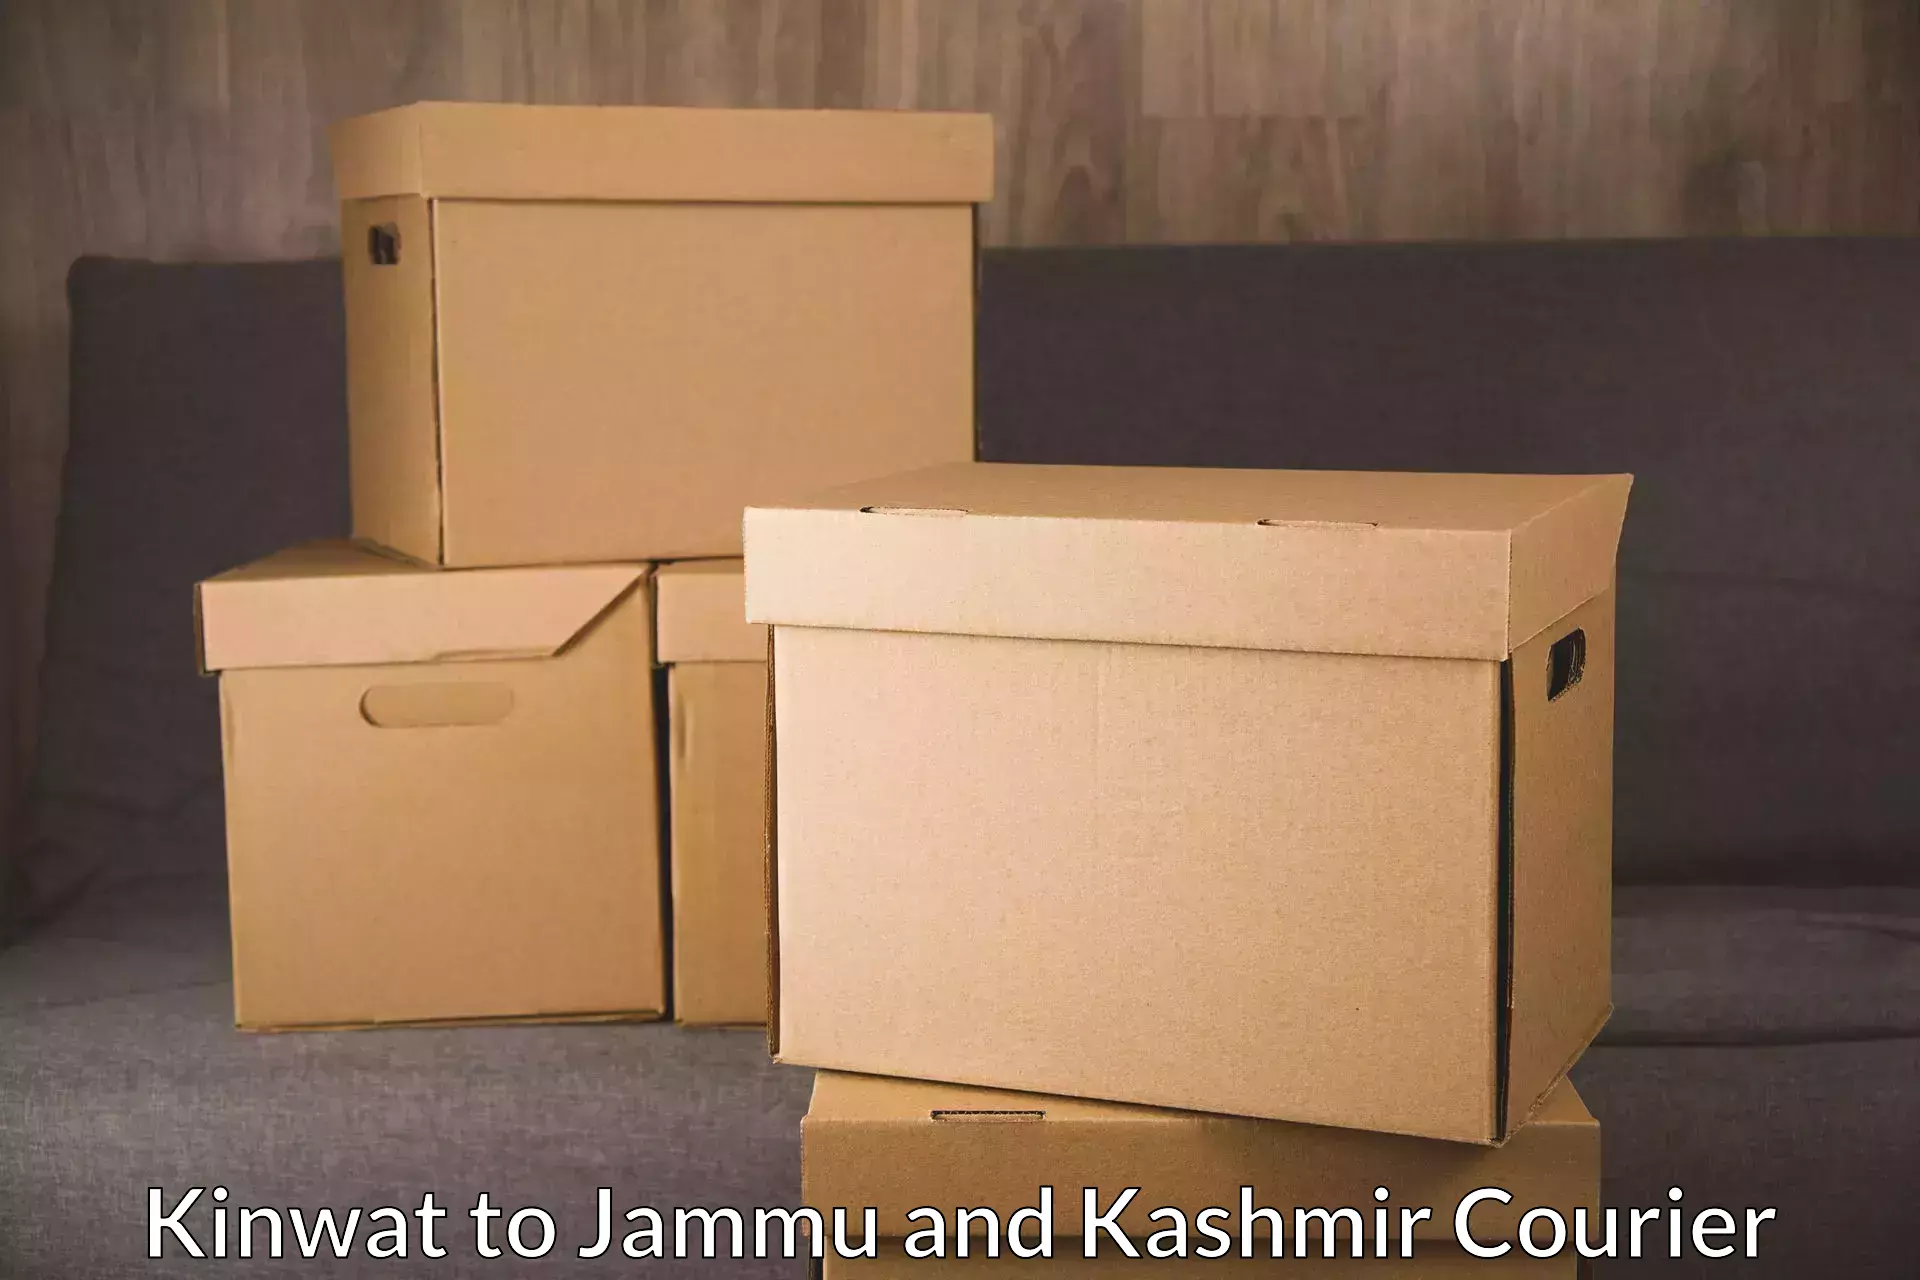 Comprehensive shipping network in Kinwat to Katra